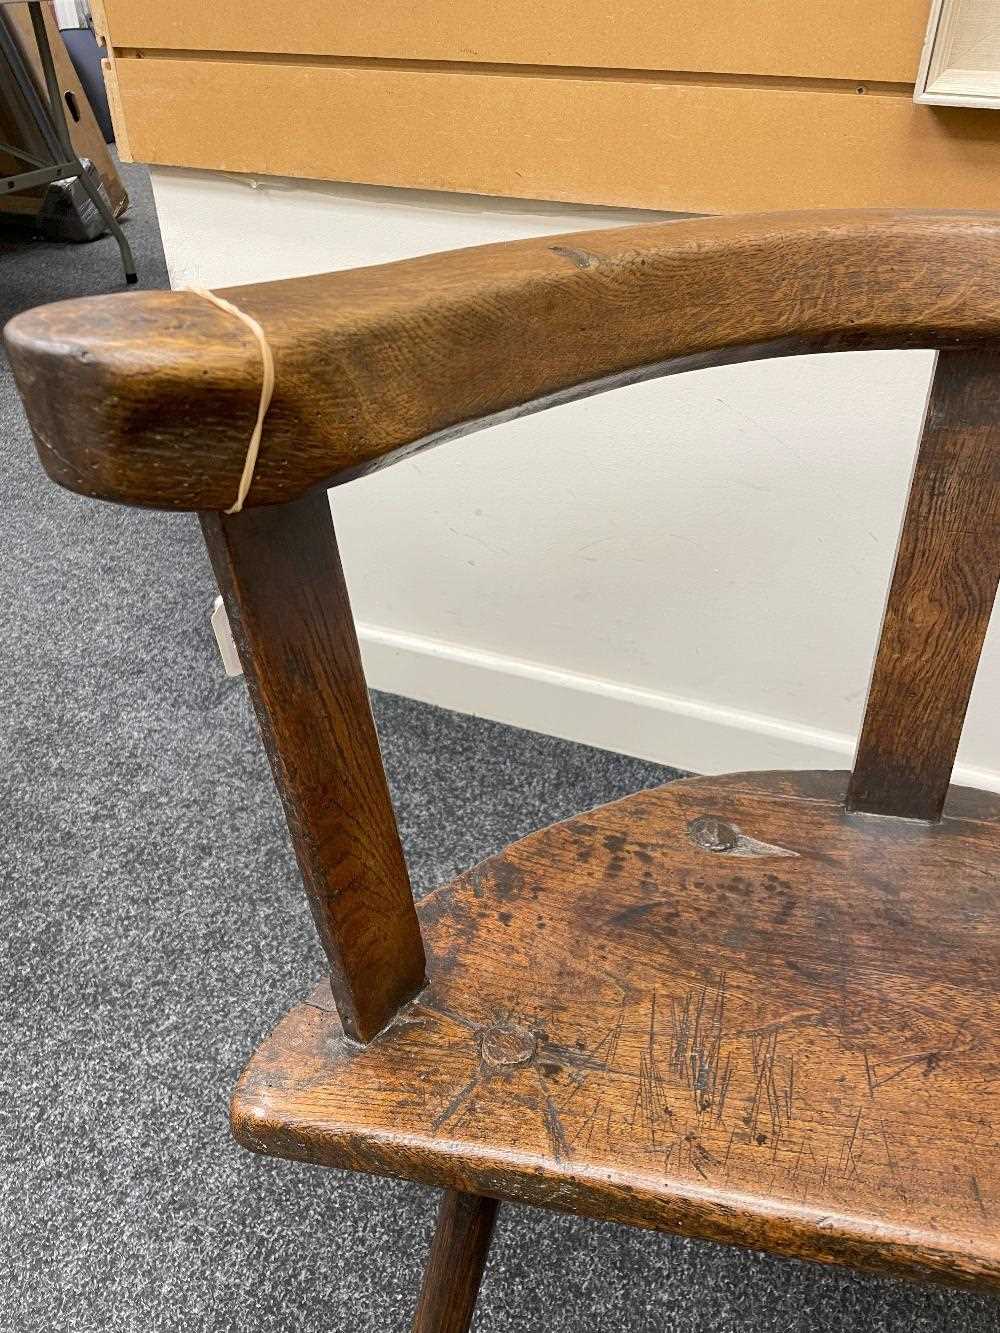 WELSH OAK, ELM & ASH YOKE-BACK CHAIR 18th Century, probably Cardiganshire, thick shaped rail above - Image 4 of 24